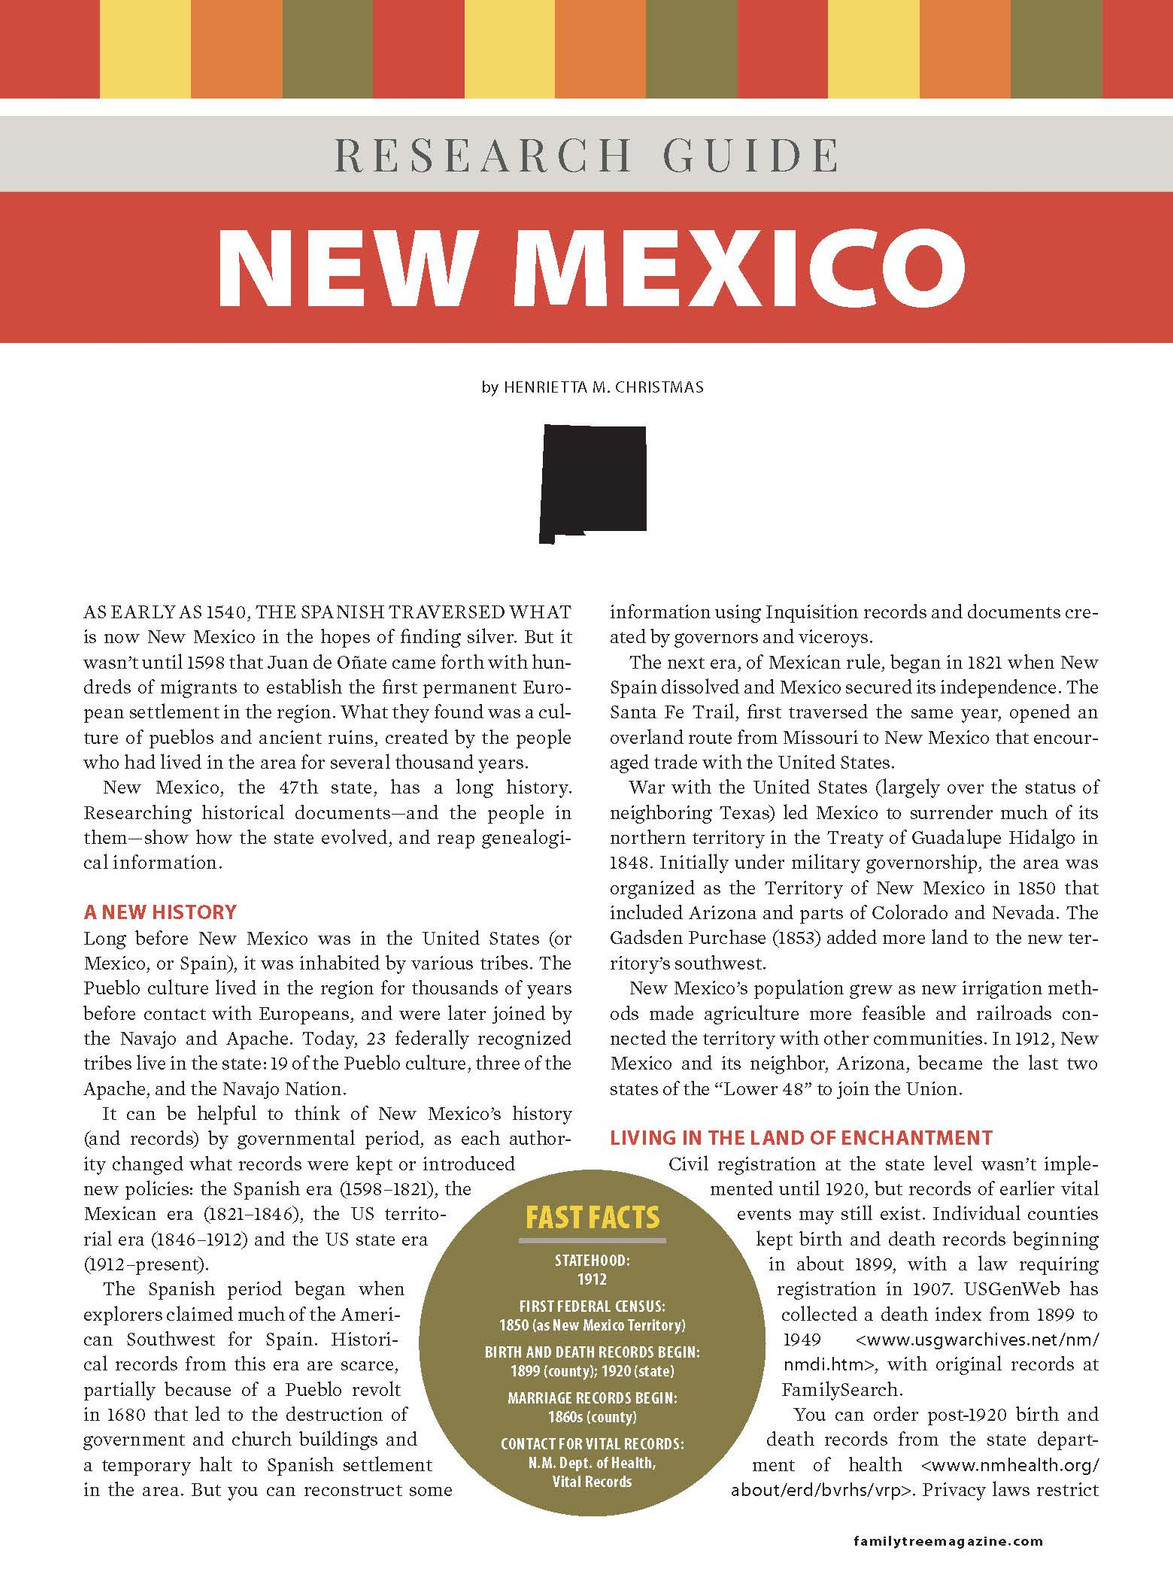 New Mexico Research Guide Digital Download